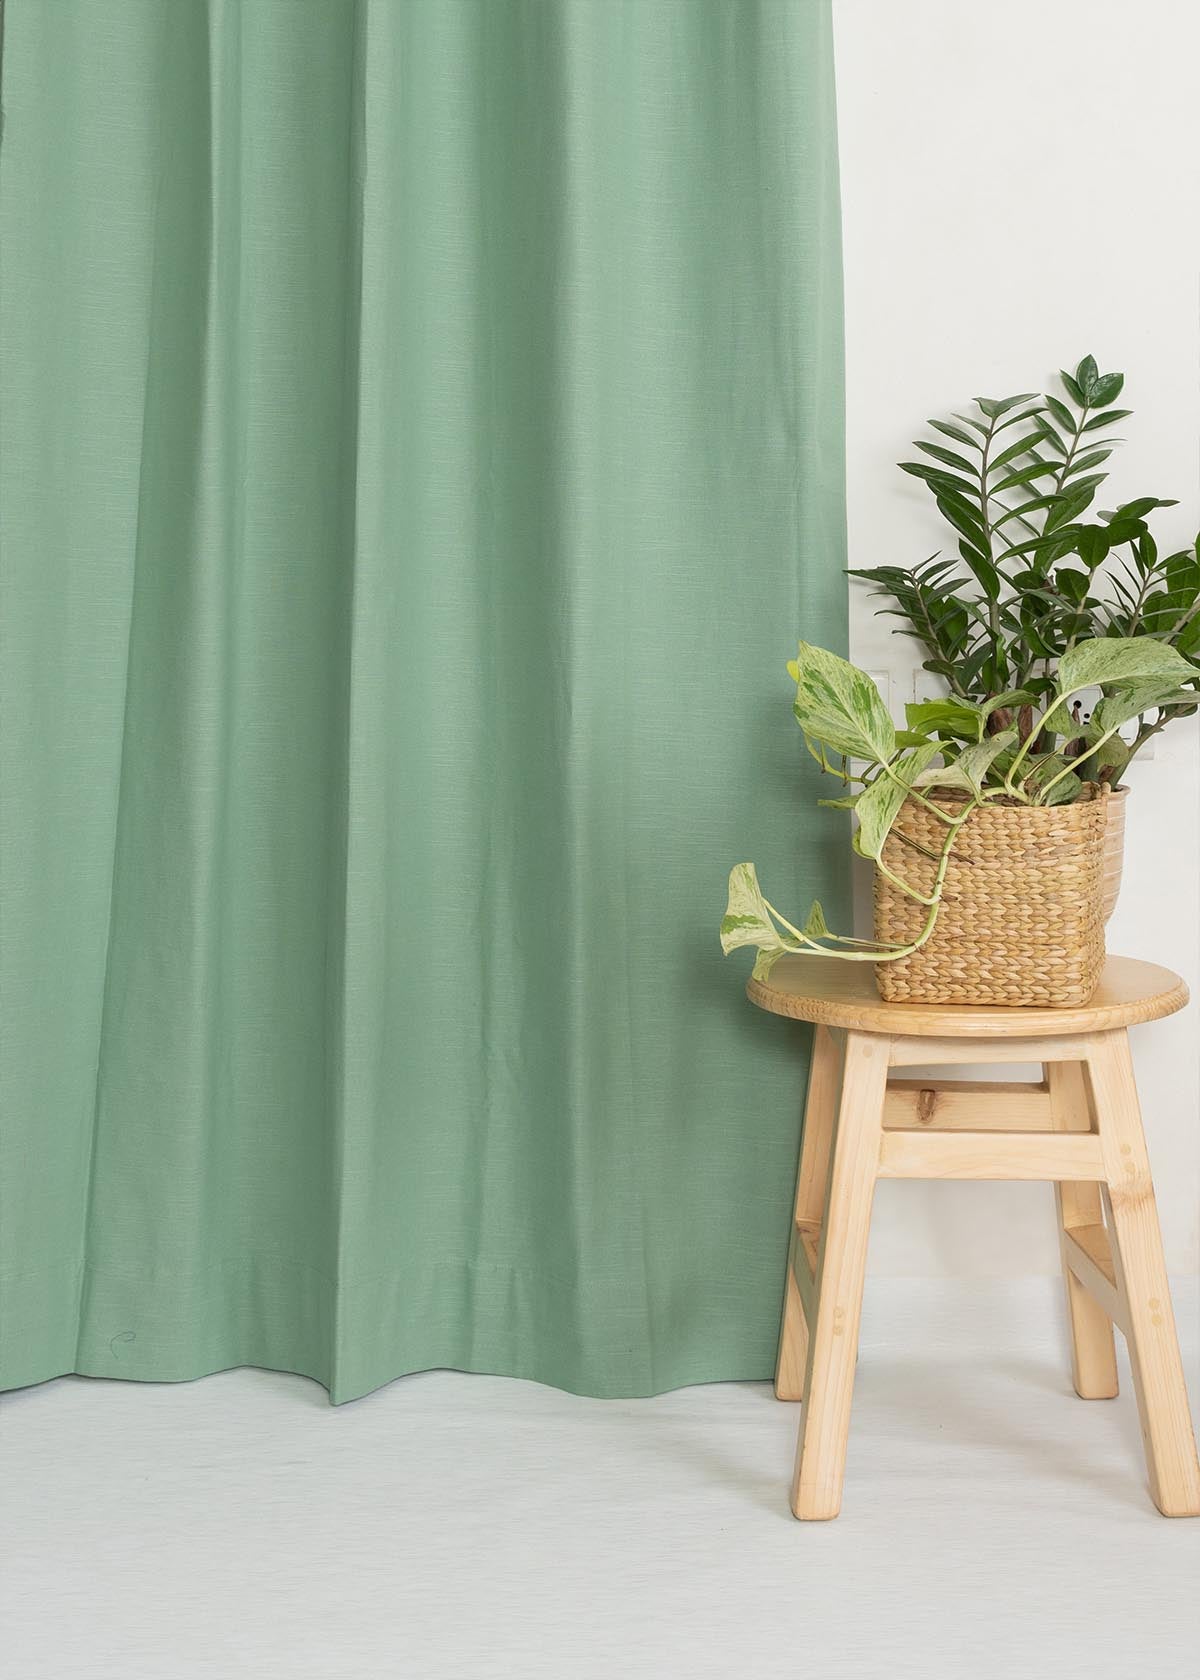 Solid Sage green 100% Customizable Cotton plain curtain for bedroom - Room darkening